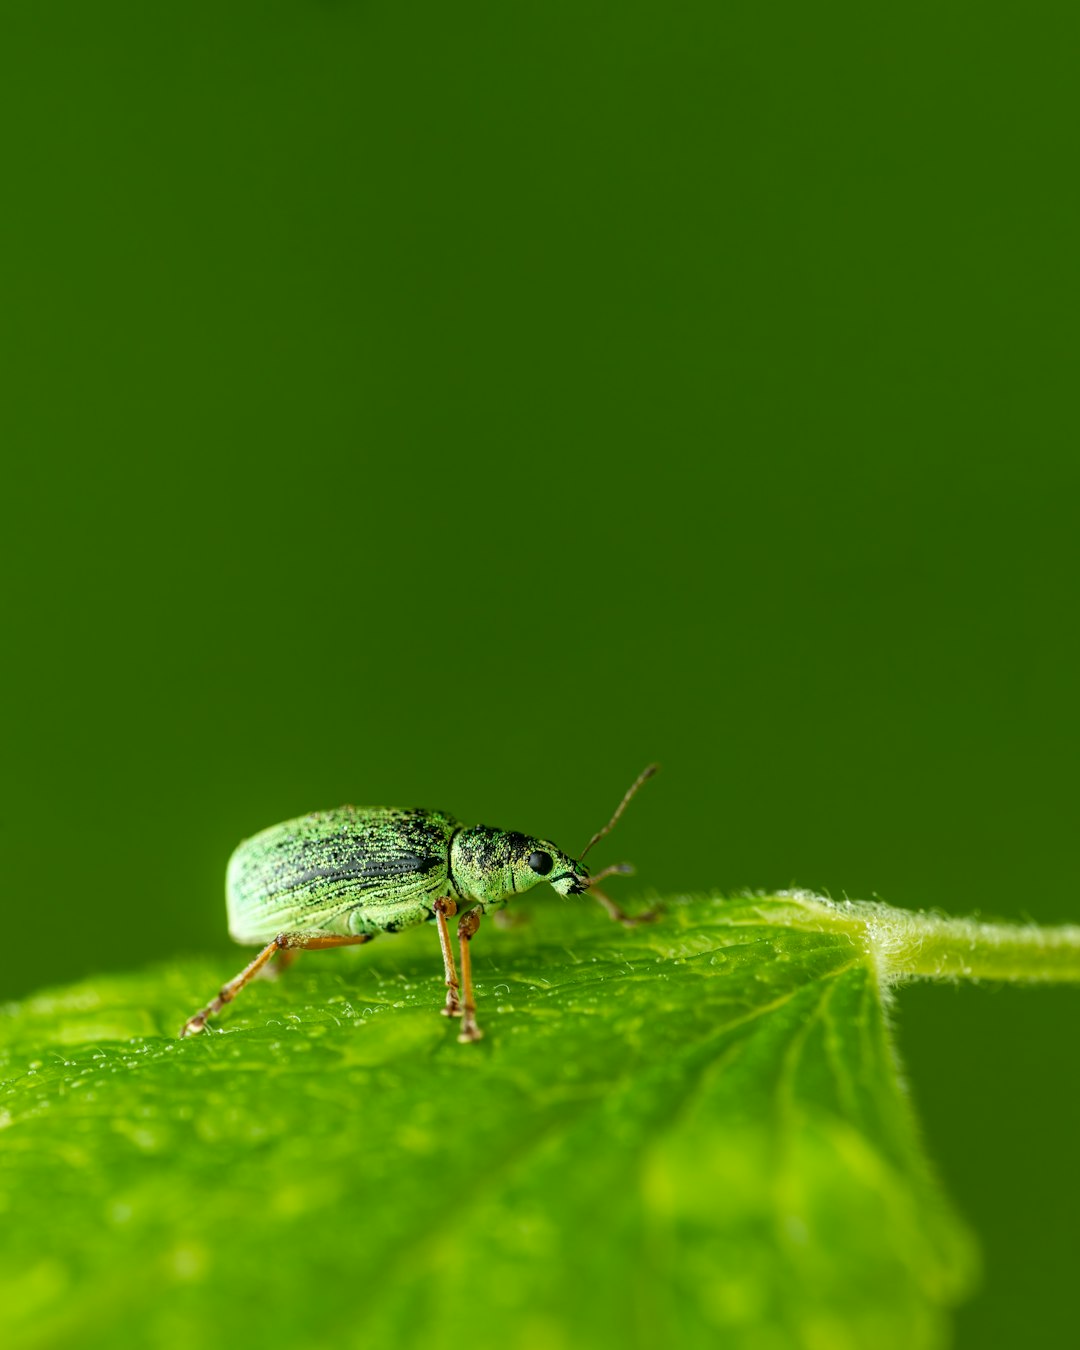 herniaria pests, aphids, a green bug on a leaf